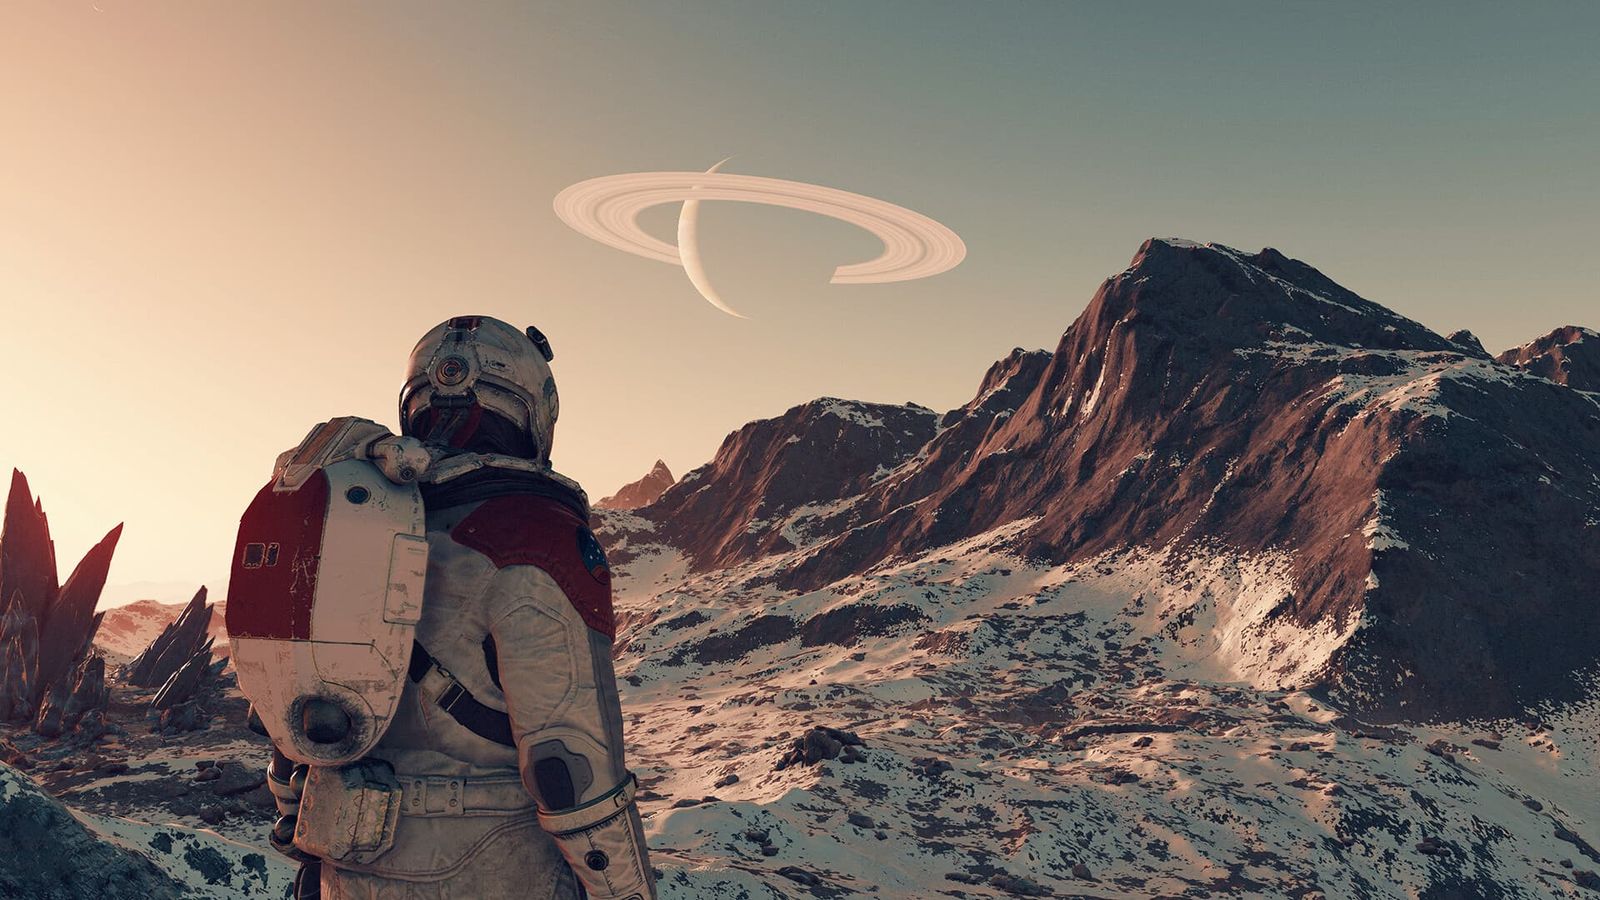 An astronaut looks out to a ringed planet